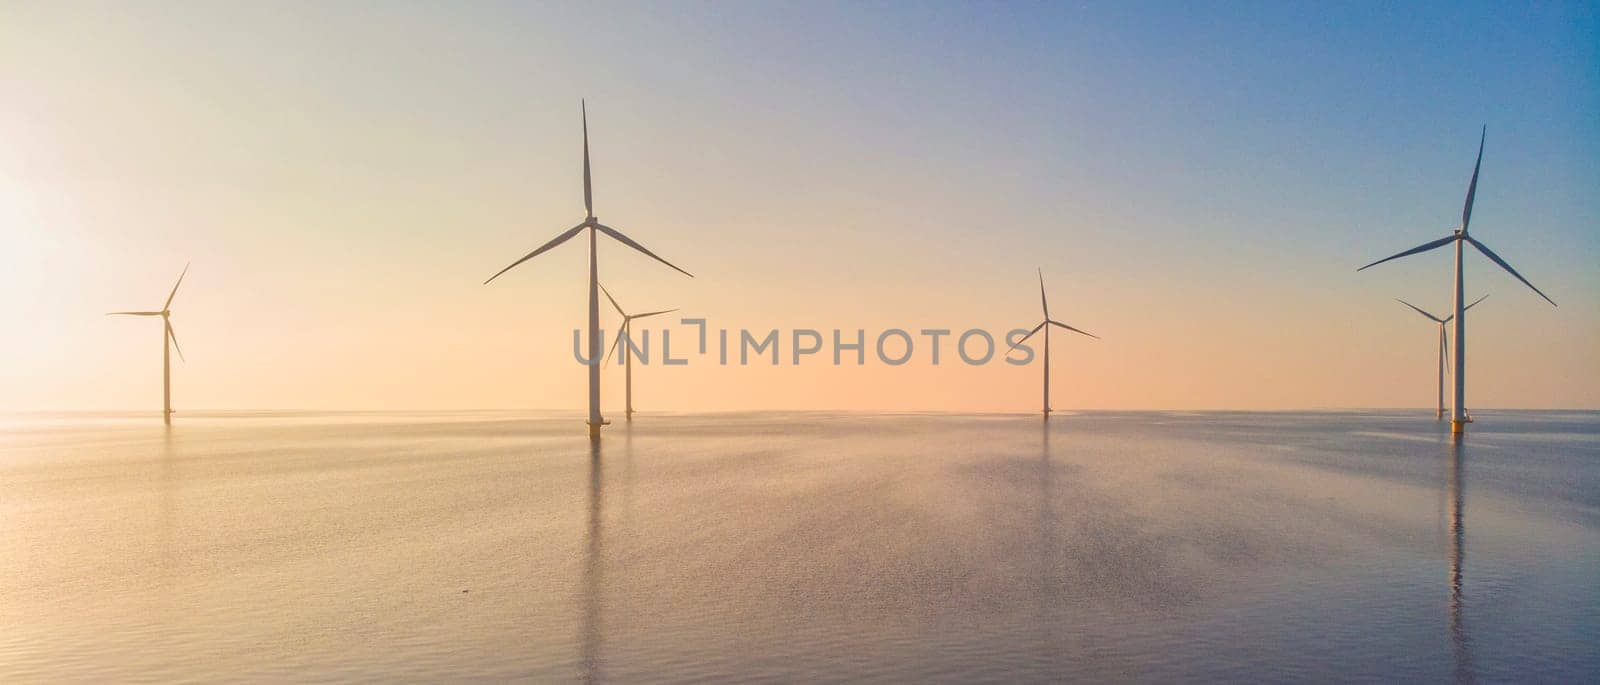 Windmill park in the ocean at sunset, drone aerial view of windmill turbines generating green energy, windmills isolated at sea in the Netherlands.